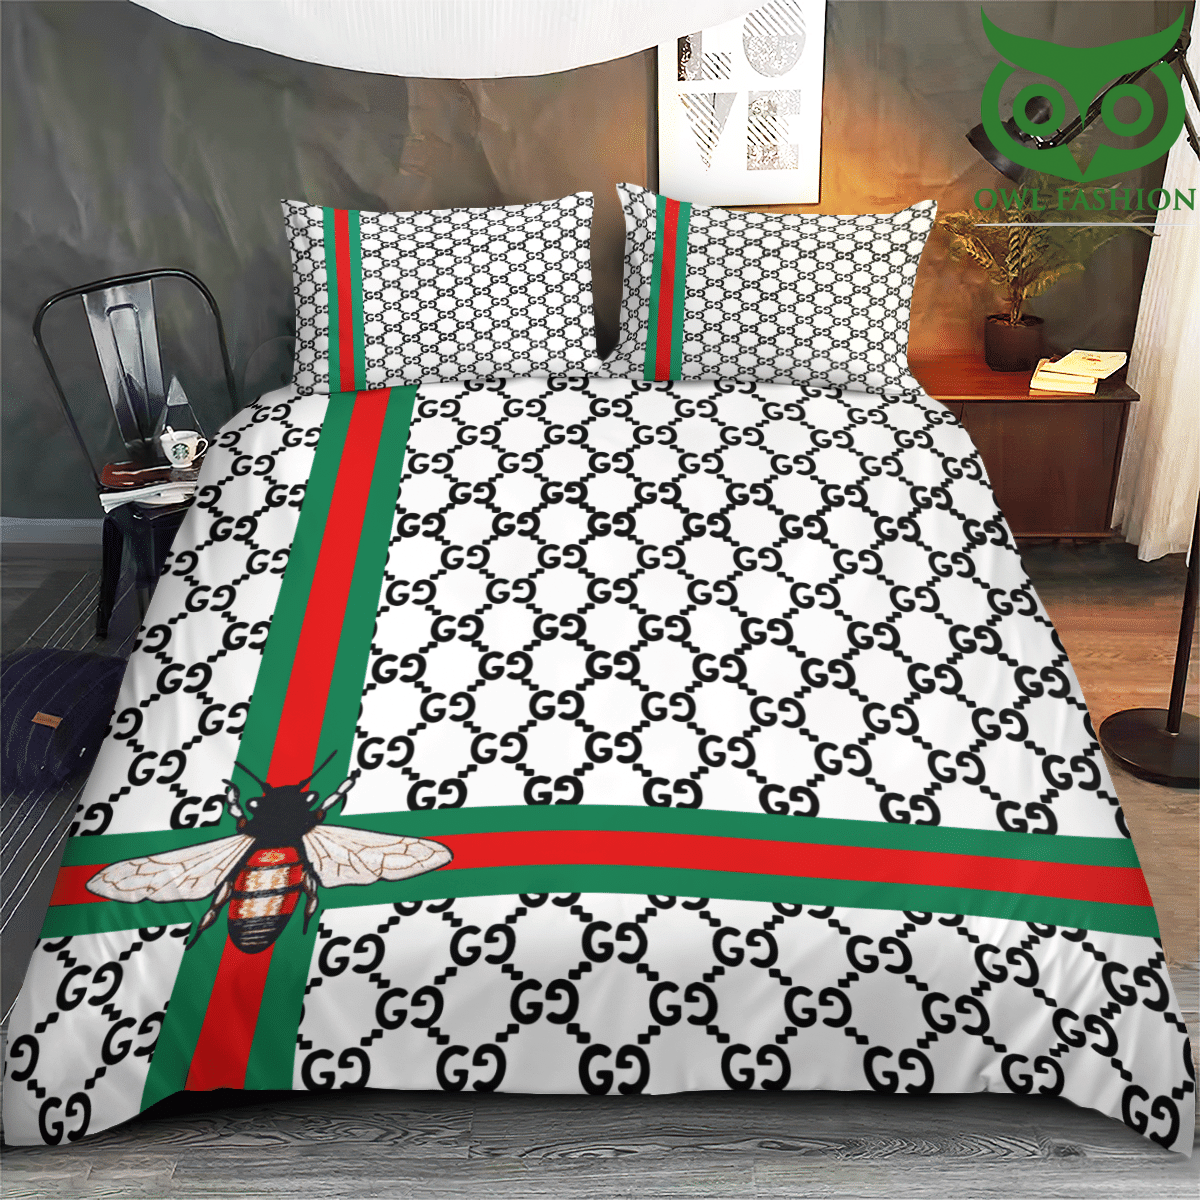 Gucci Bee Red Green luxury bedding set